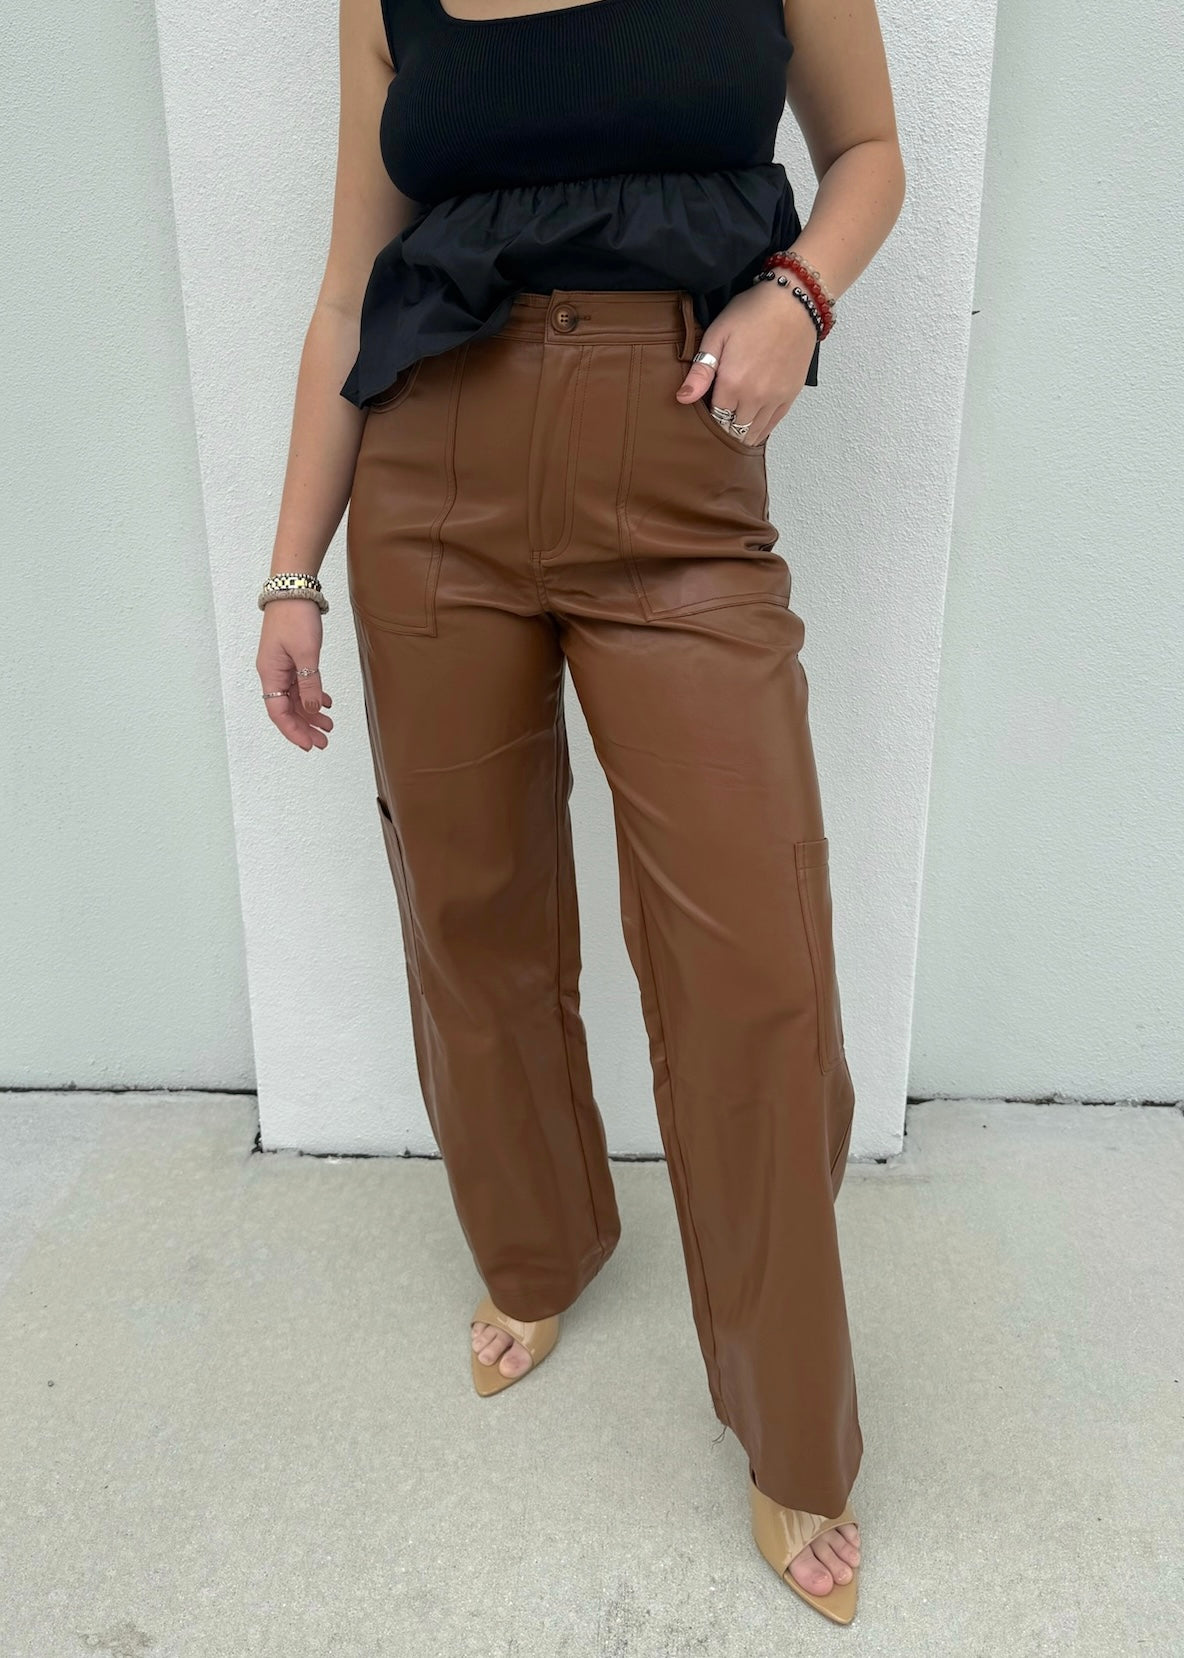 Brittany B*tch: Camel Faux Leather Cargo Pants